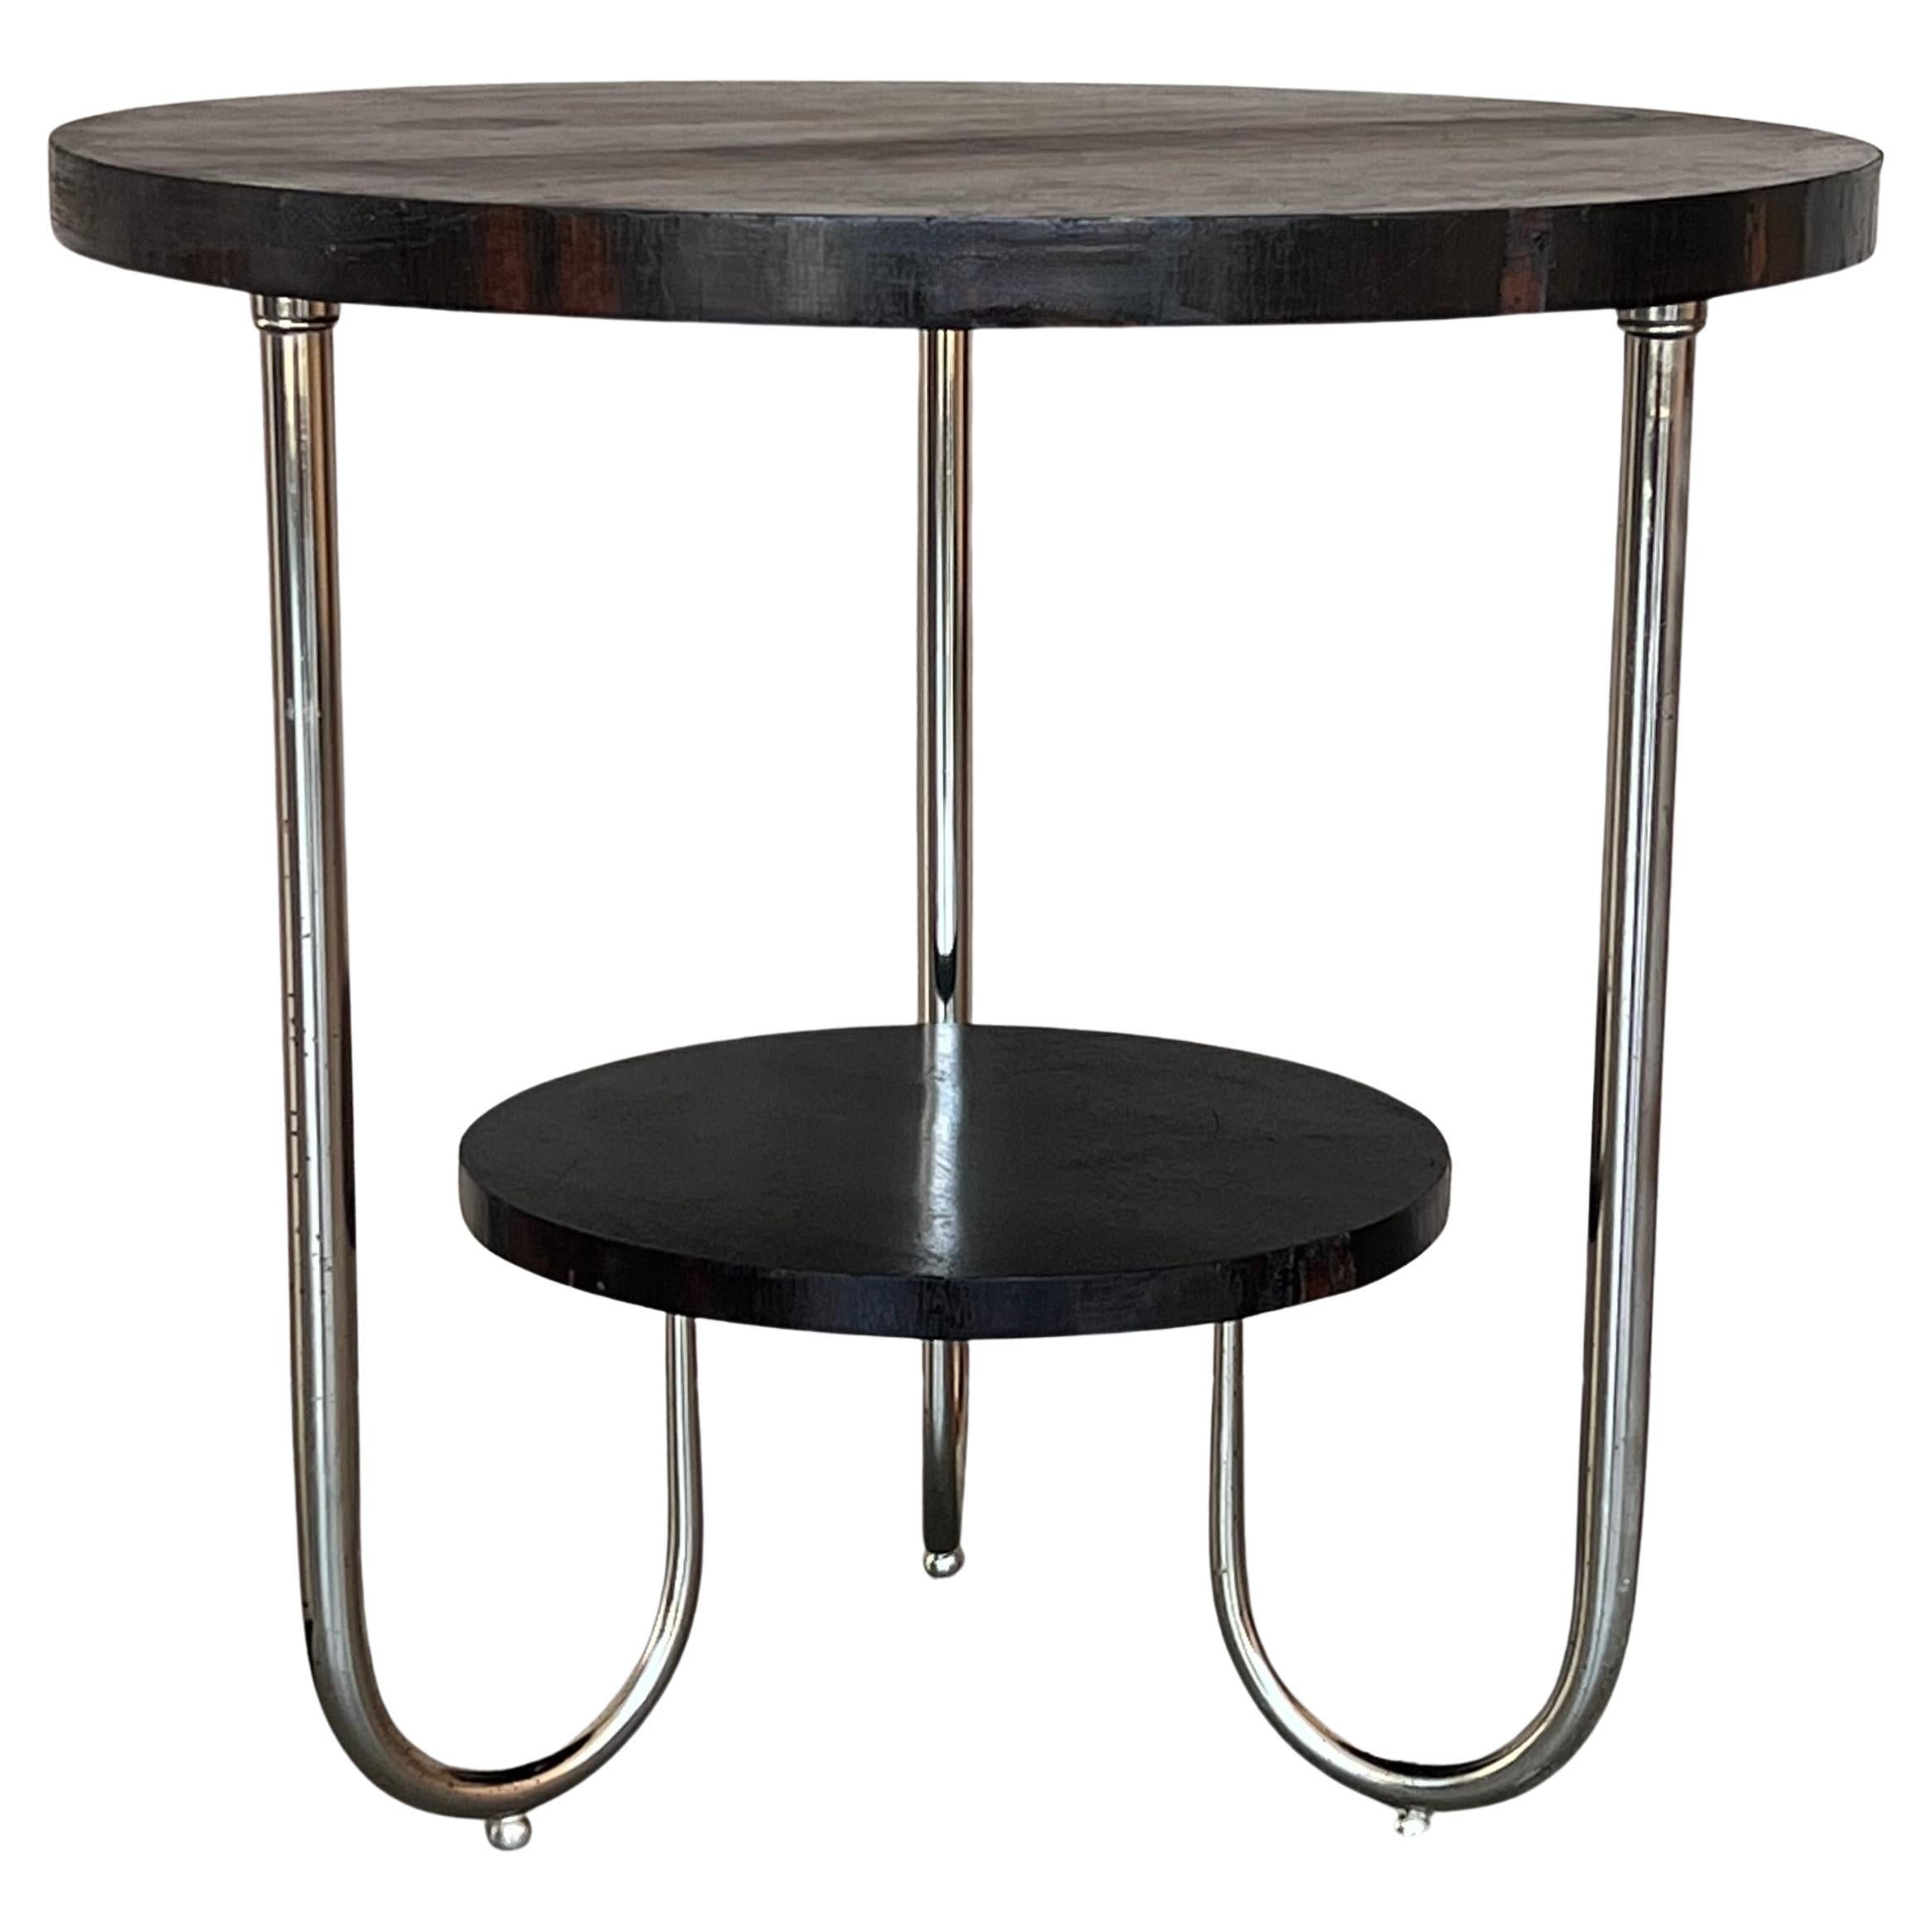 A Fine French Art Deco Mahogany and Chrome Two-Tiered Gueridon Side Table